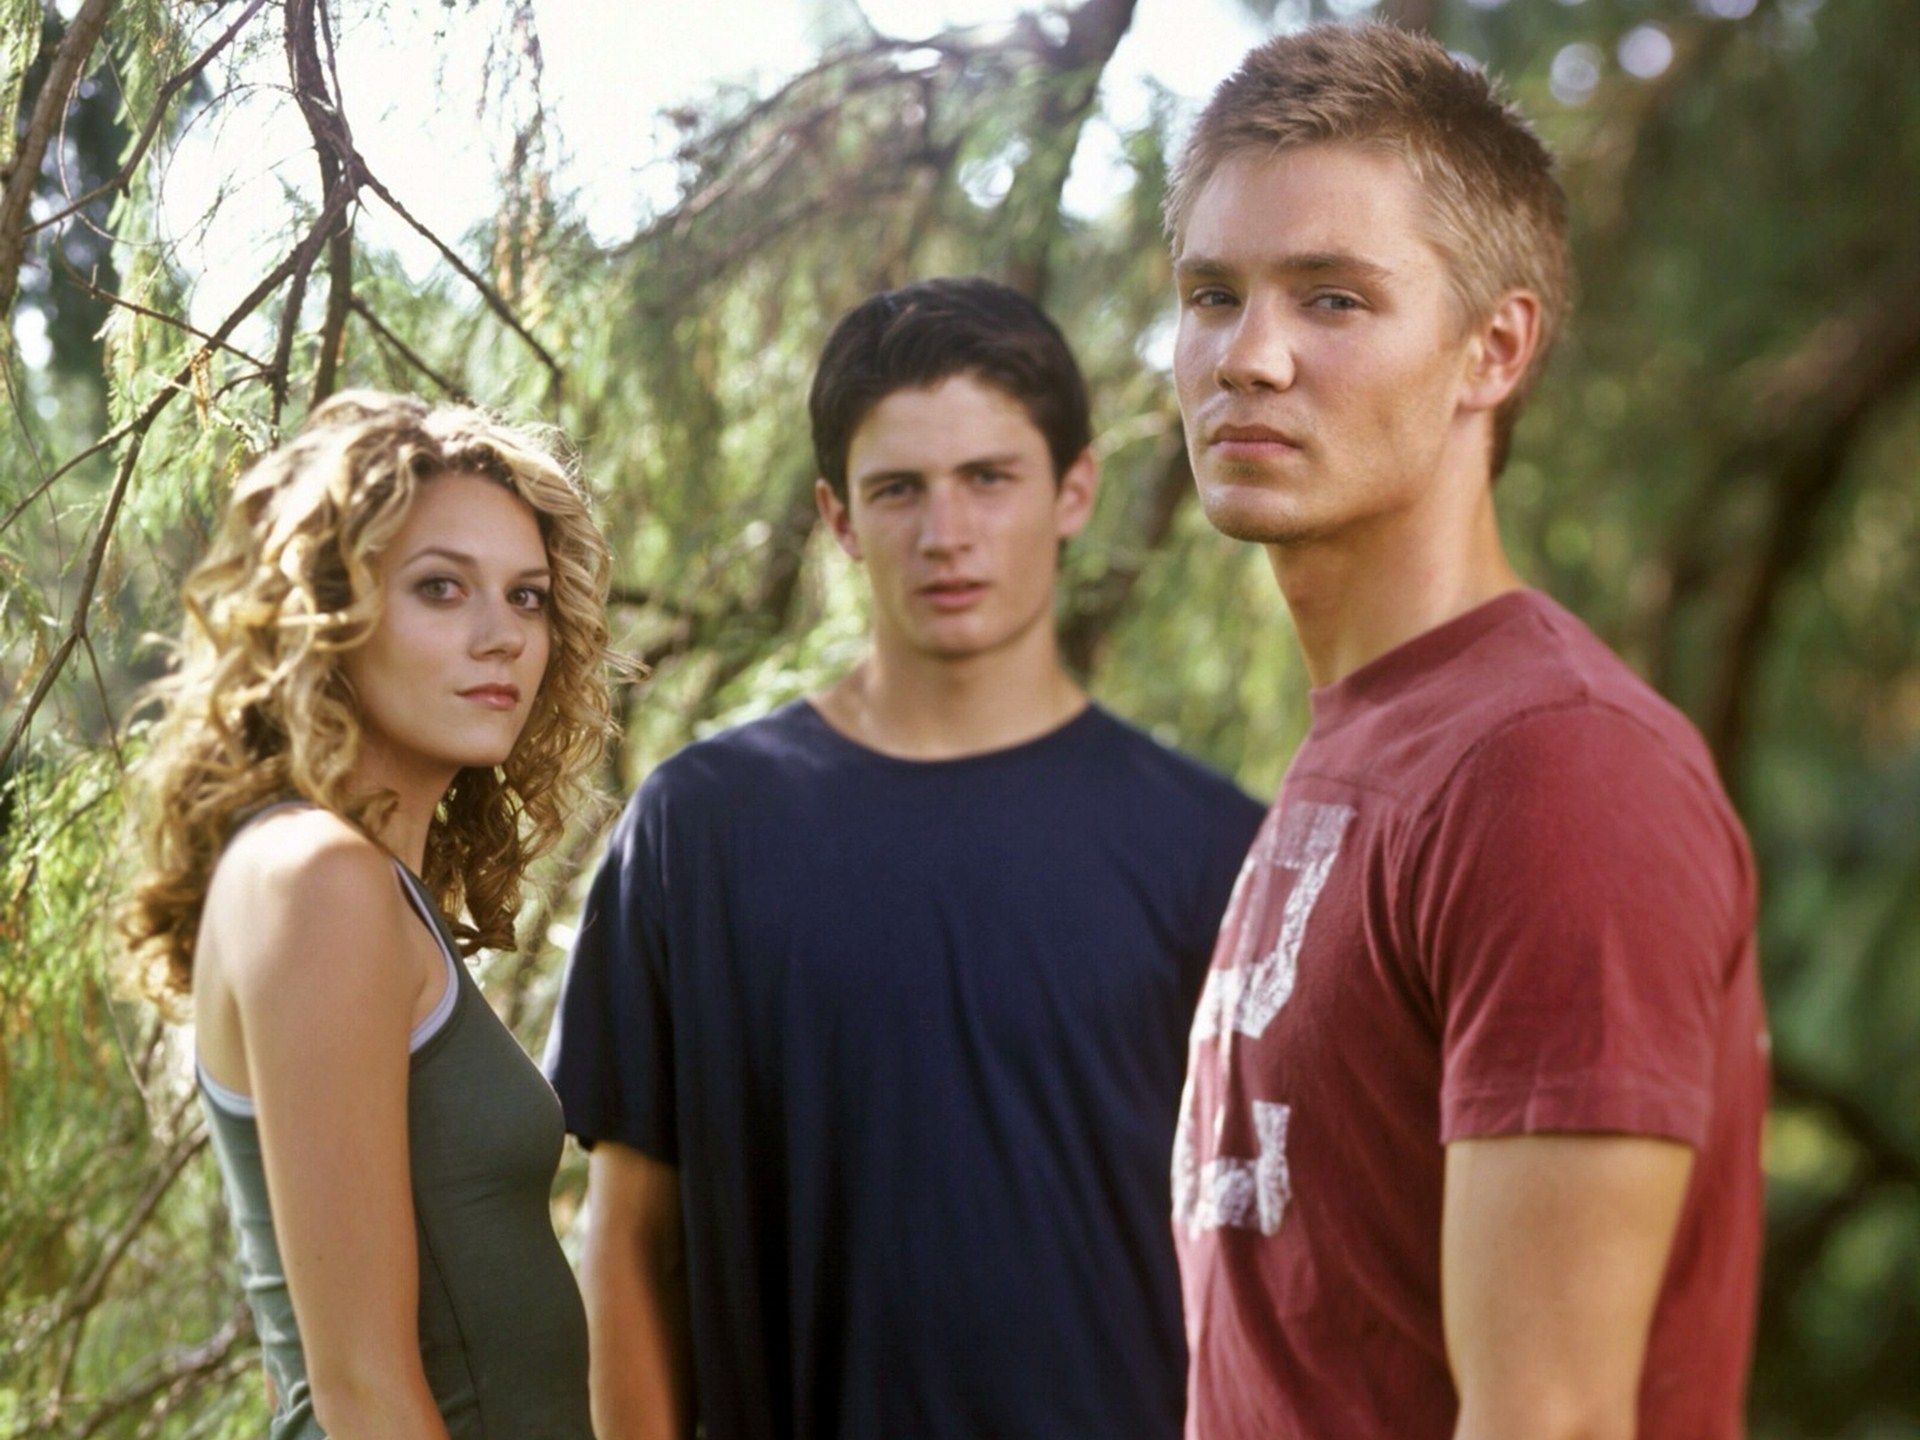 Here's what the One Tree Hill 'reunion' is actually all about